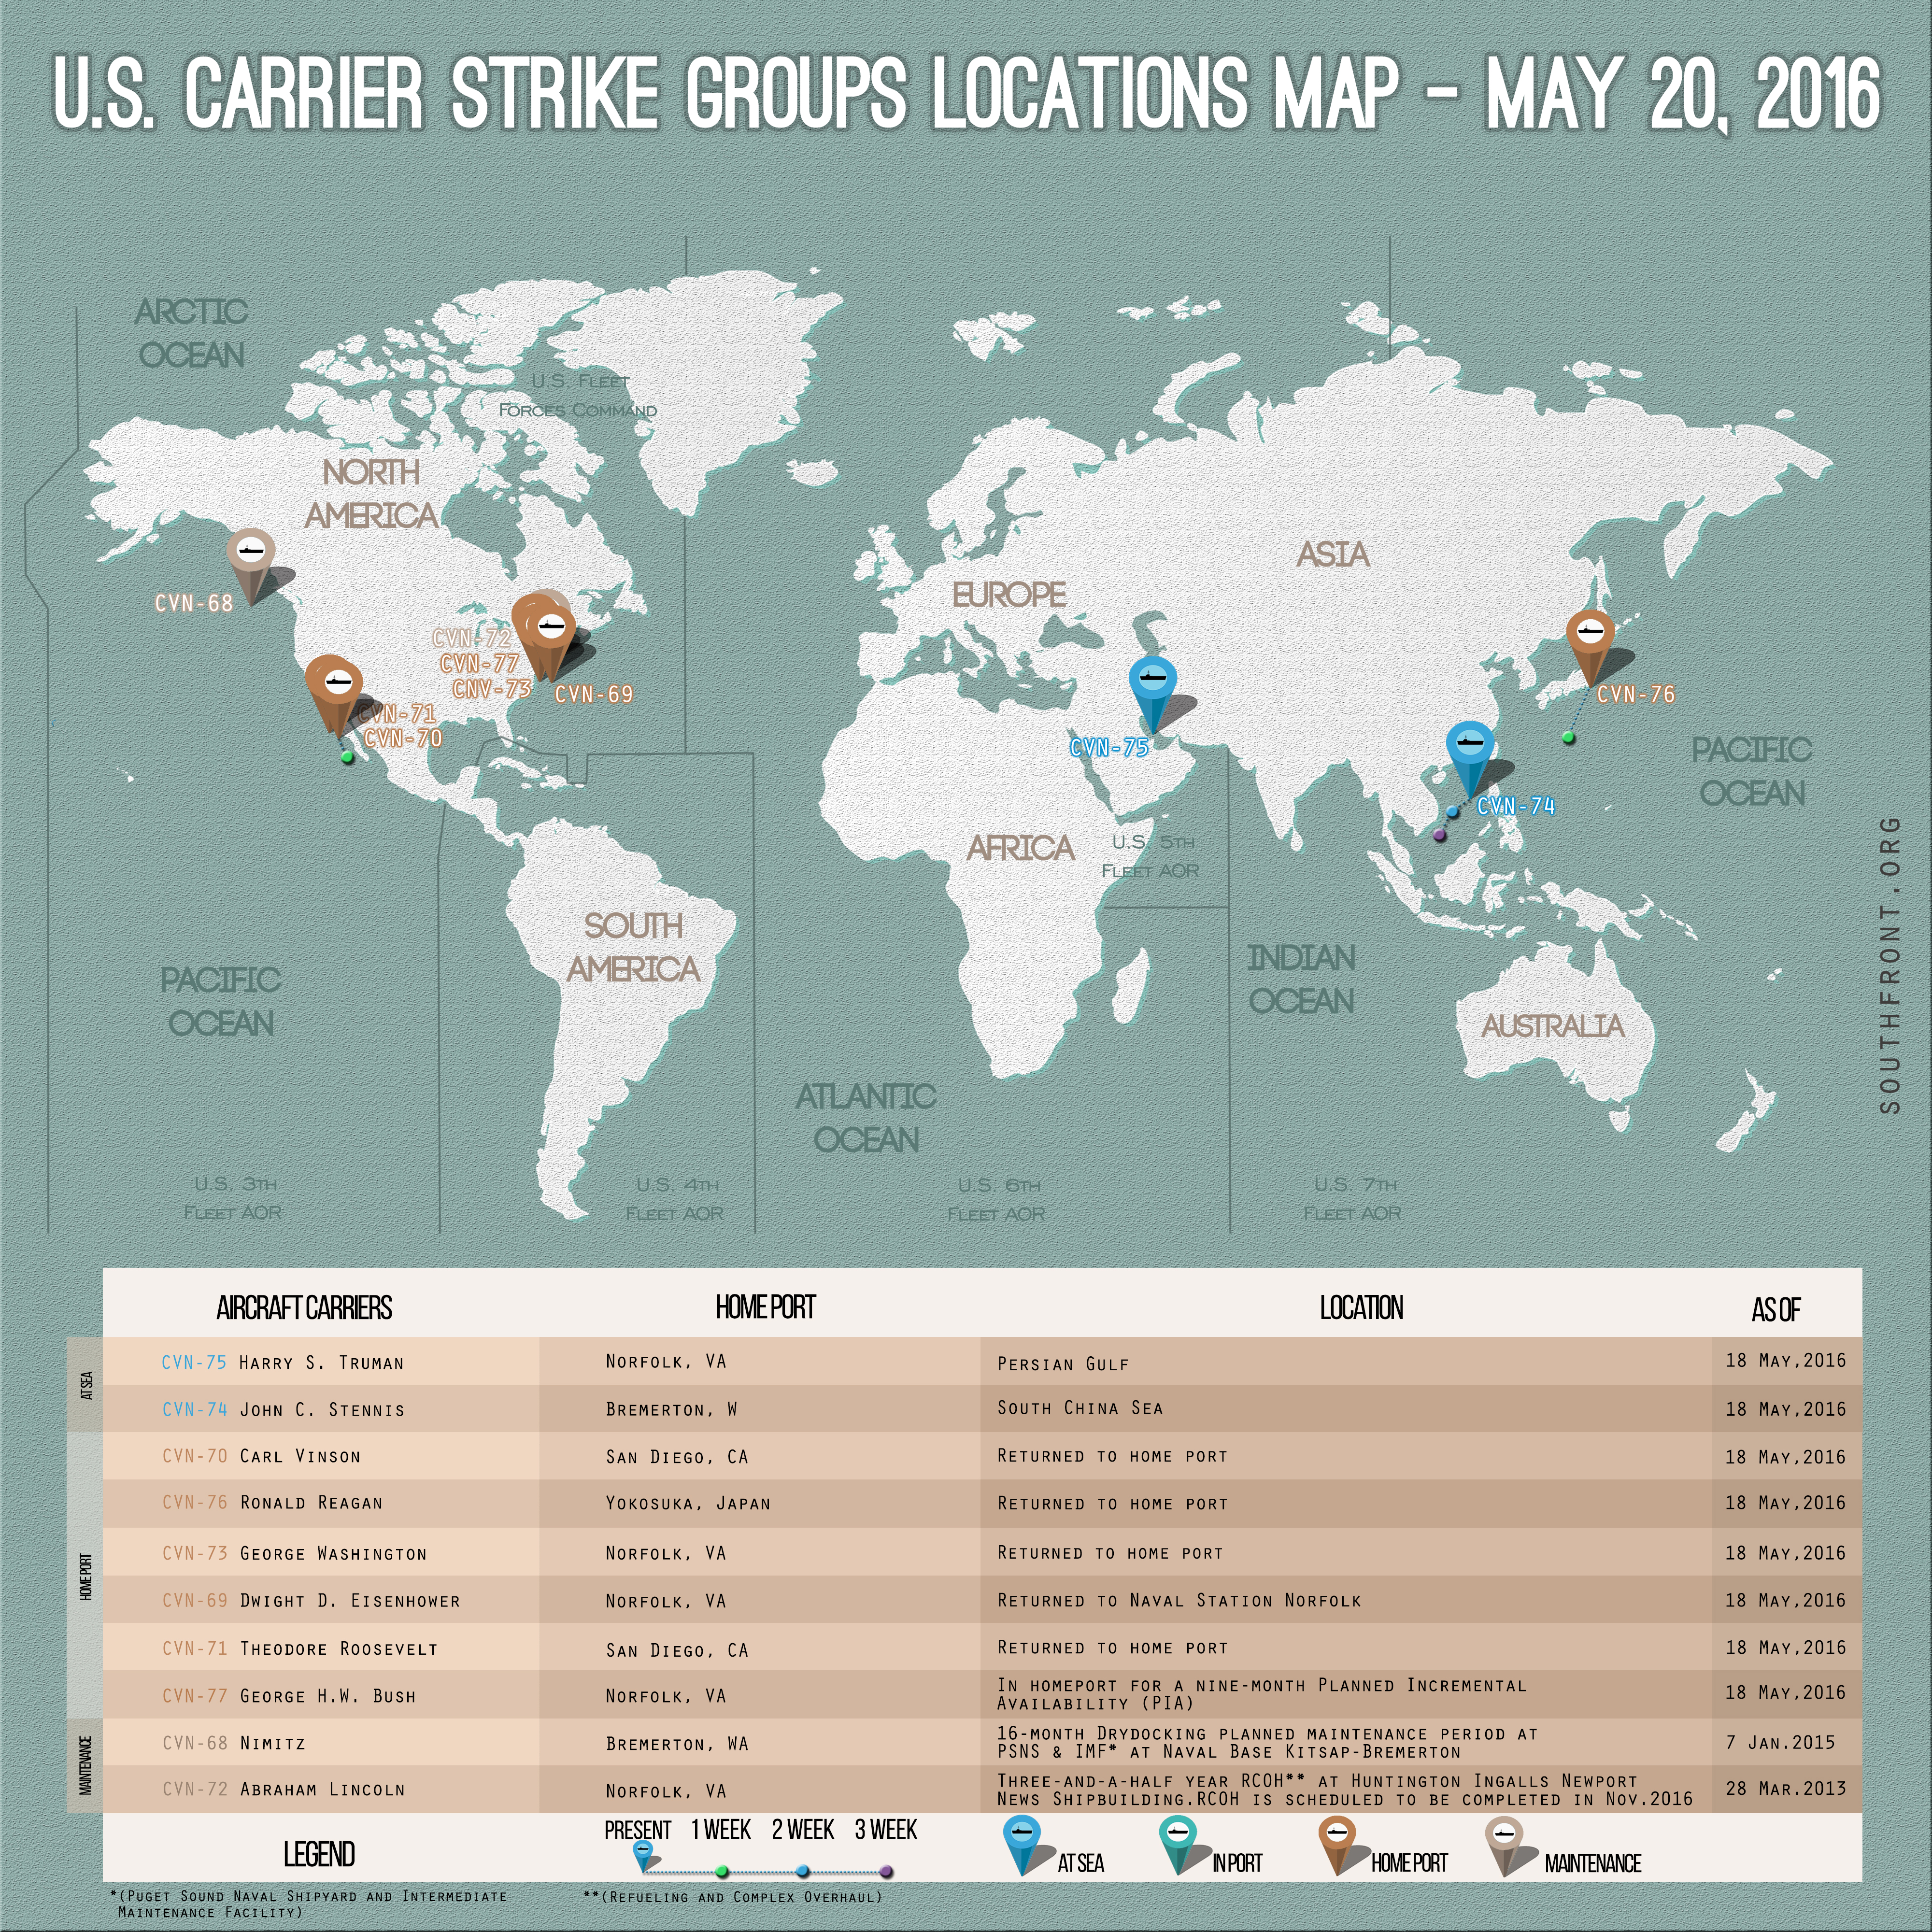 U.S. Carrier Strike Groups Locations Map – May 20, 2016